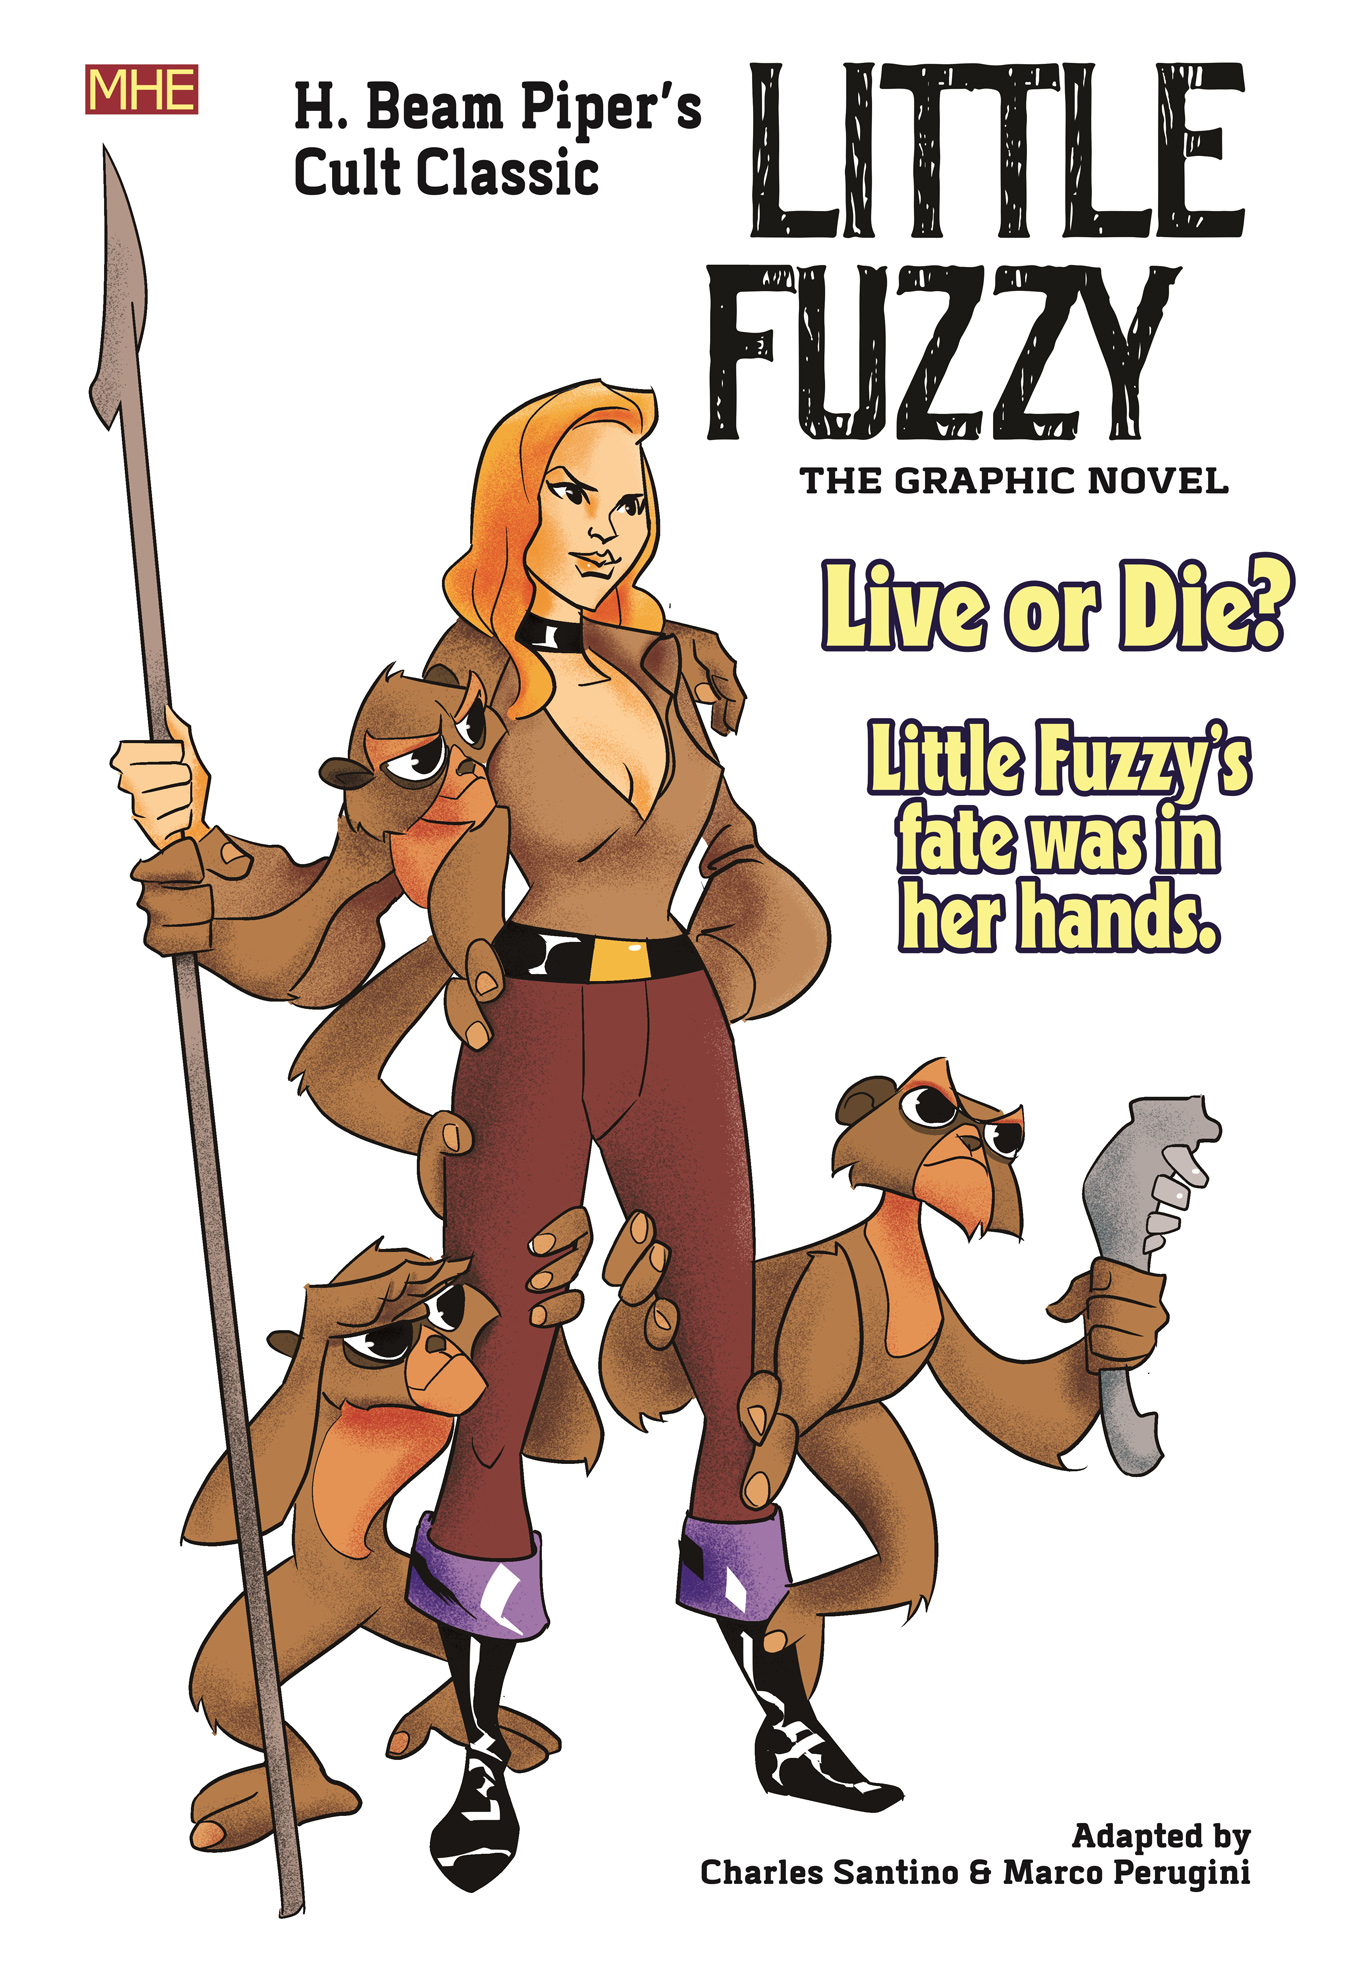 H. Beam Piper's Little Fuzzy The Graphic Novel